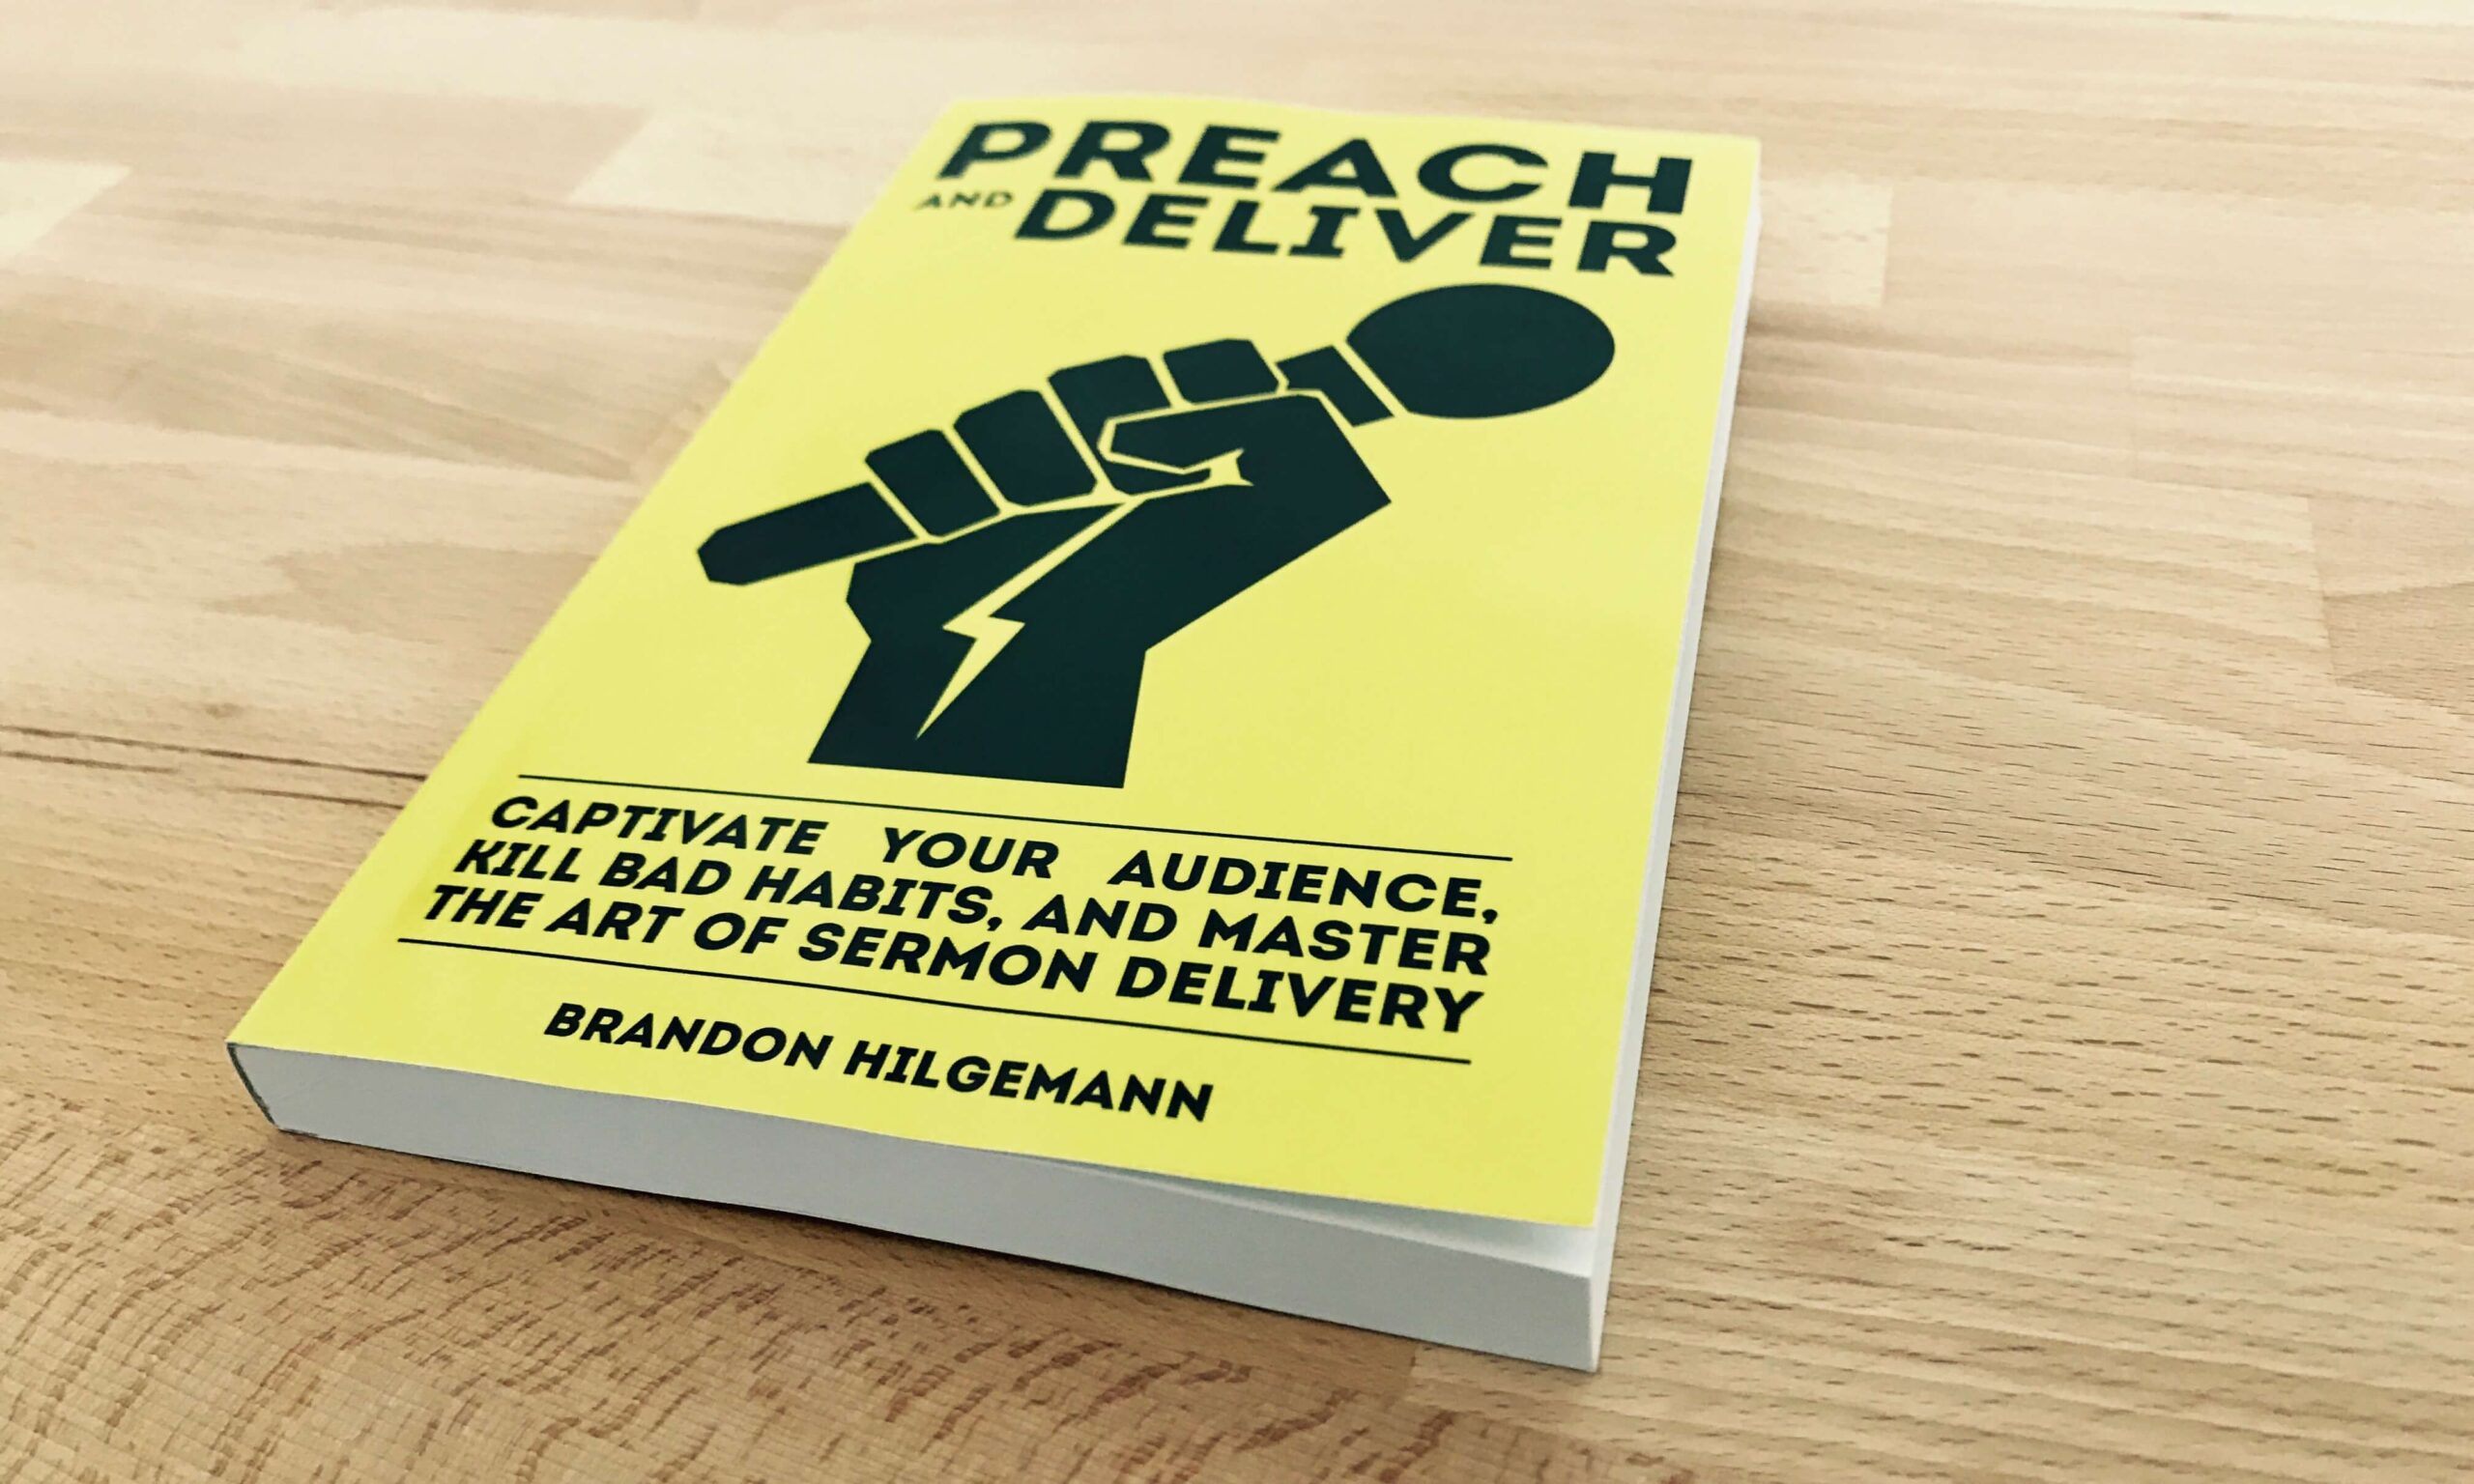 preach and deliver: captivate your audience, kill bad habits, and master the art of sermon delivery book